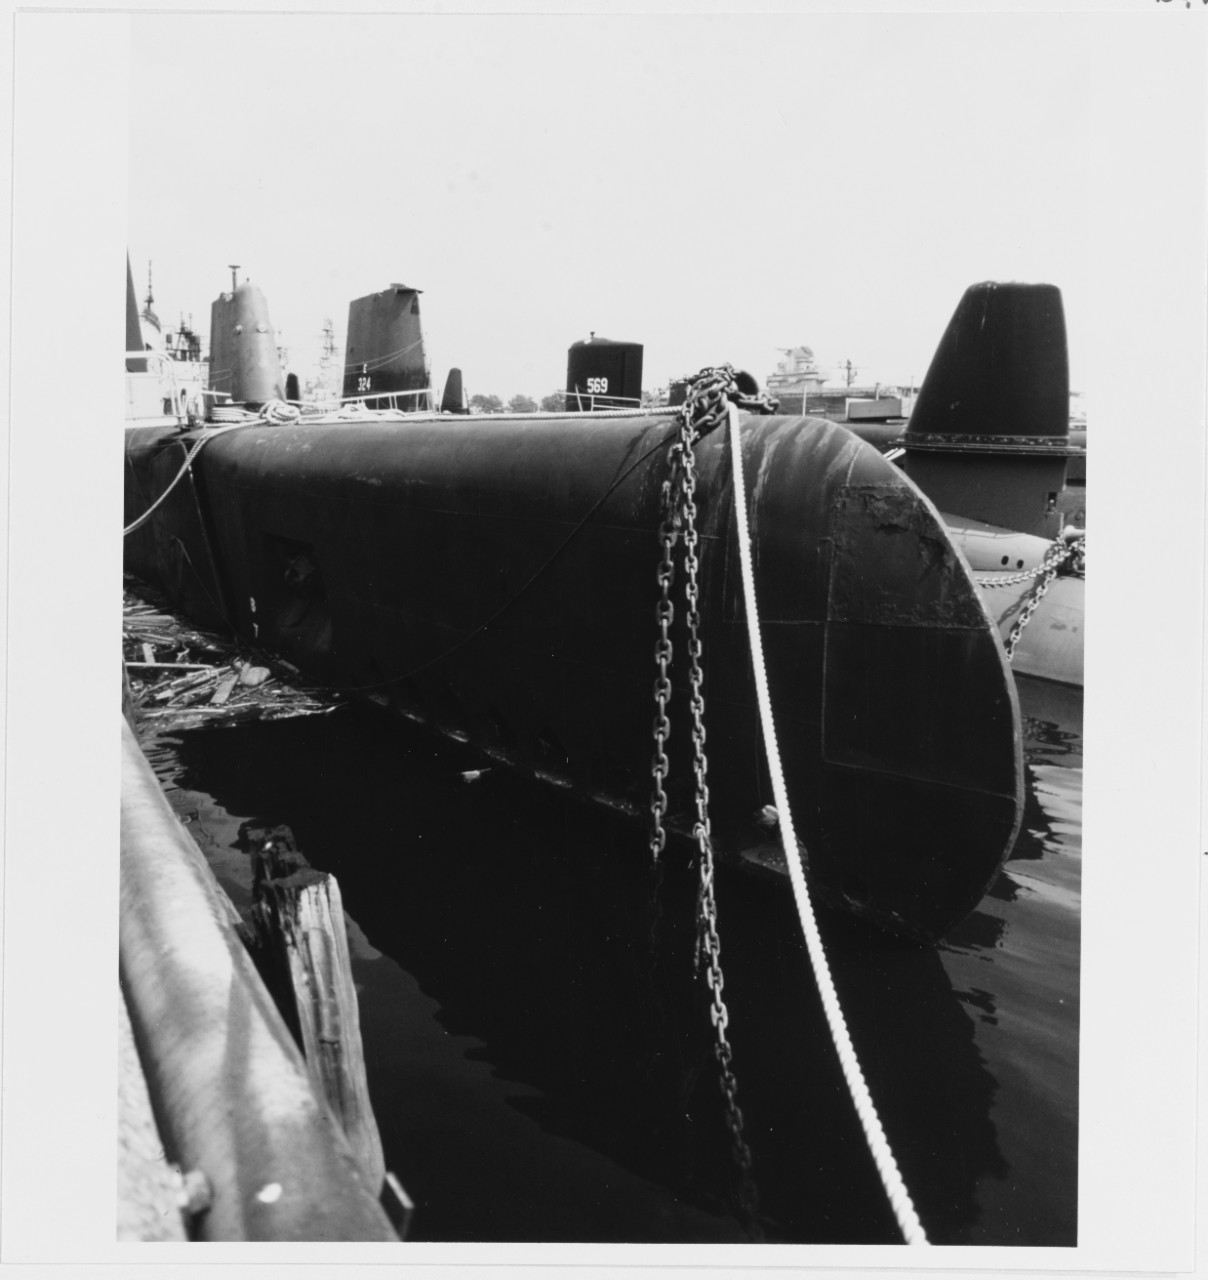 USS BLENNY (SS-324), USS ALBACORE (AGSS-569) Submarines at the Philadelphia Naval Base, October 1978.